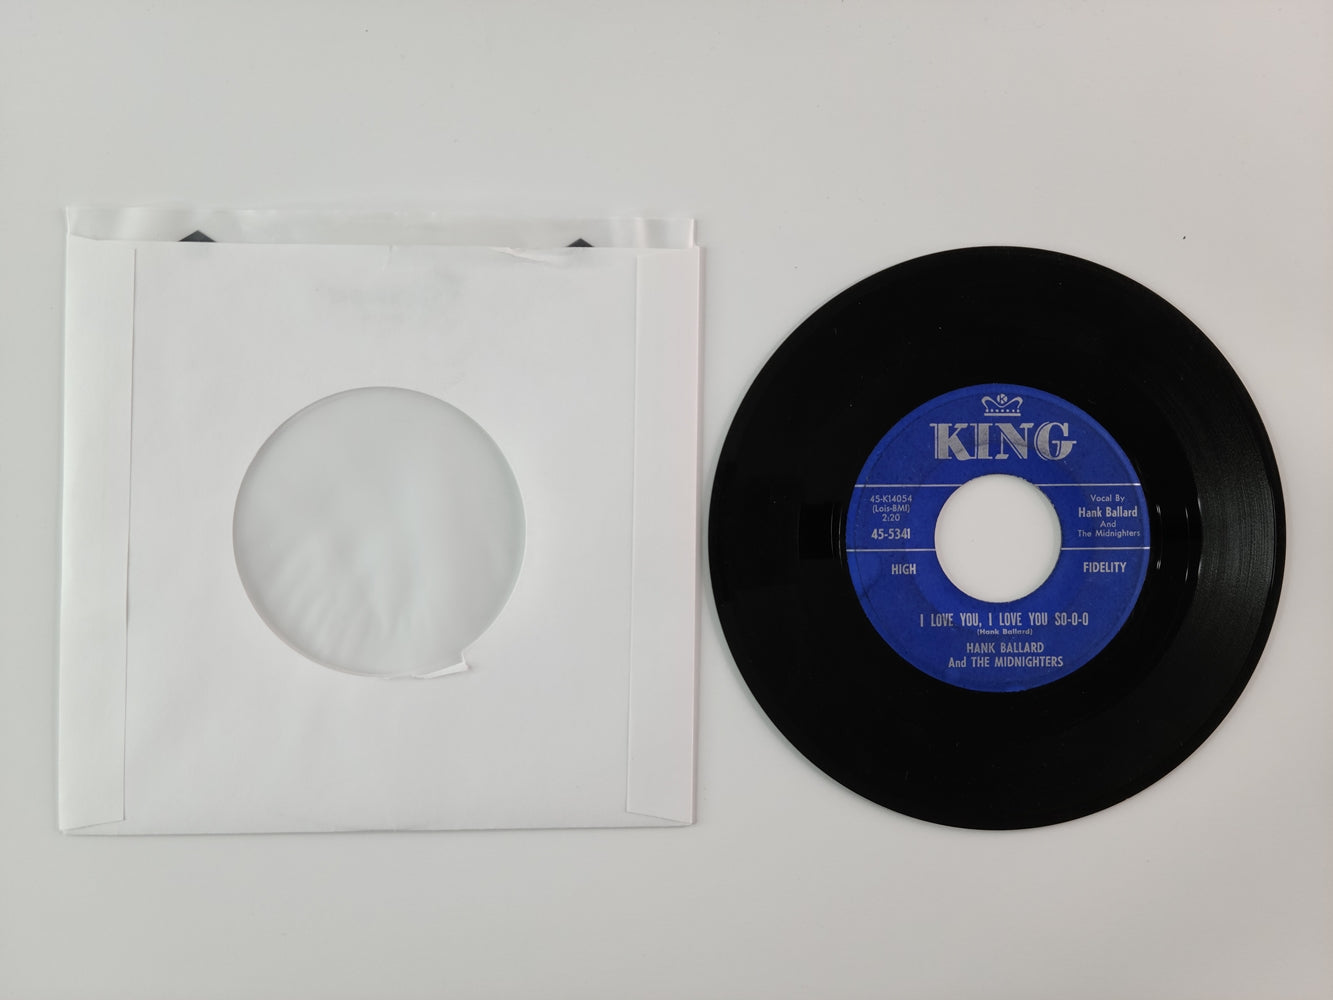 Hank Ballard and the Midnighters - Finger Poppin' Time / I Love You, I Love You So-o-o (1960, 7'' Single)